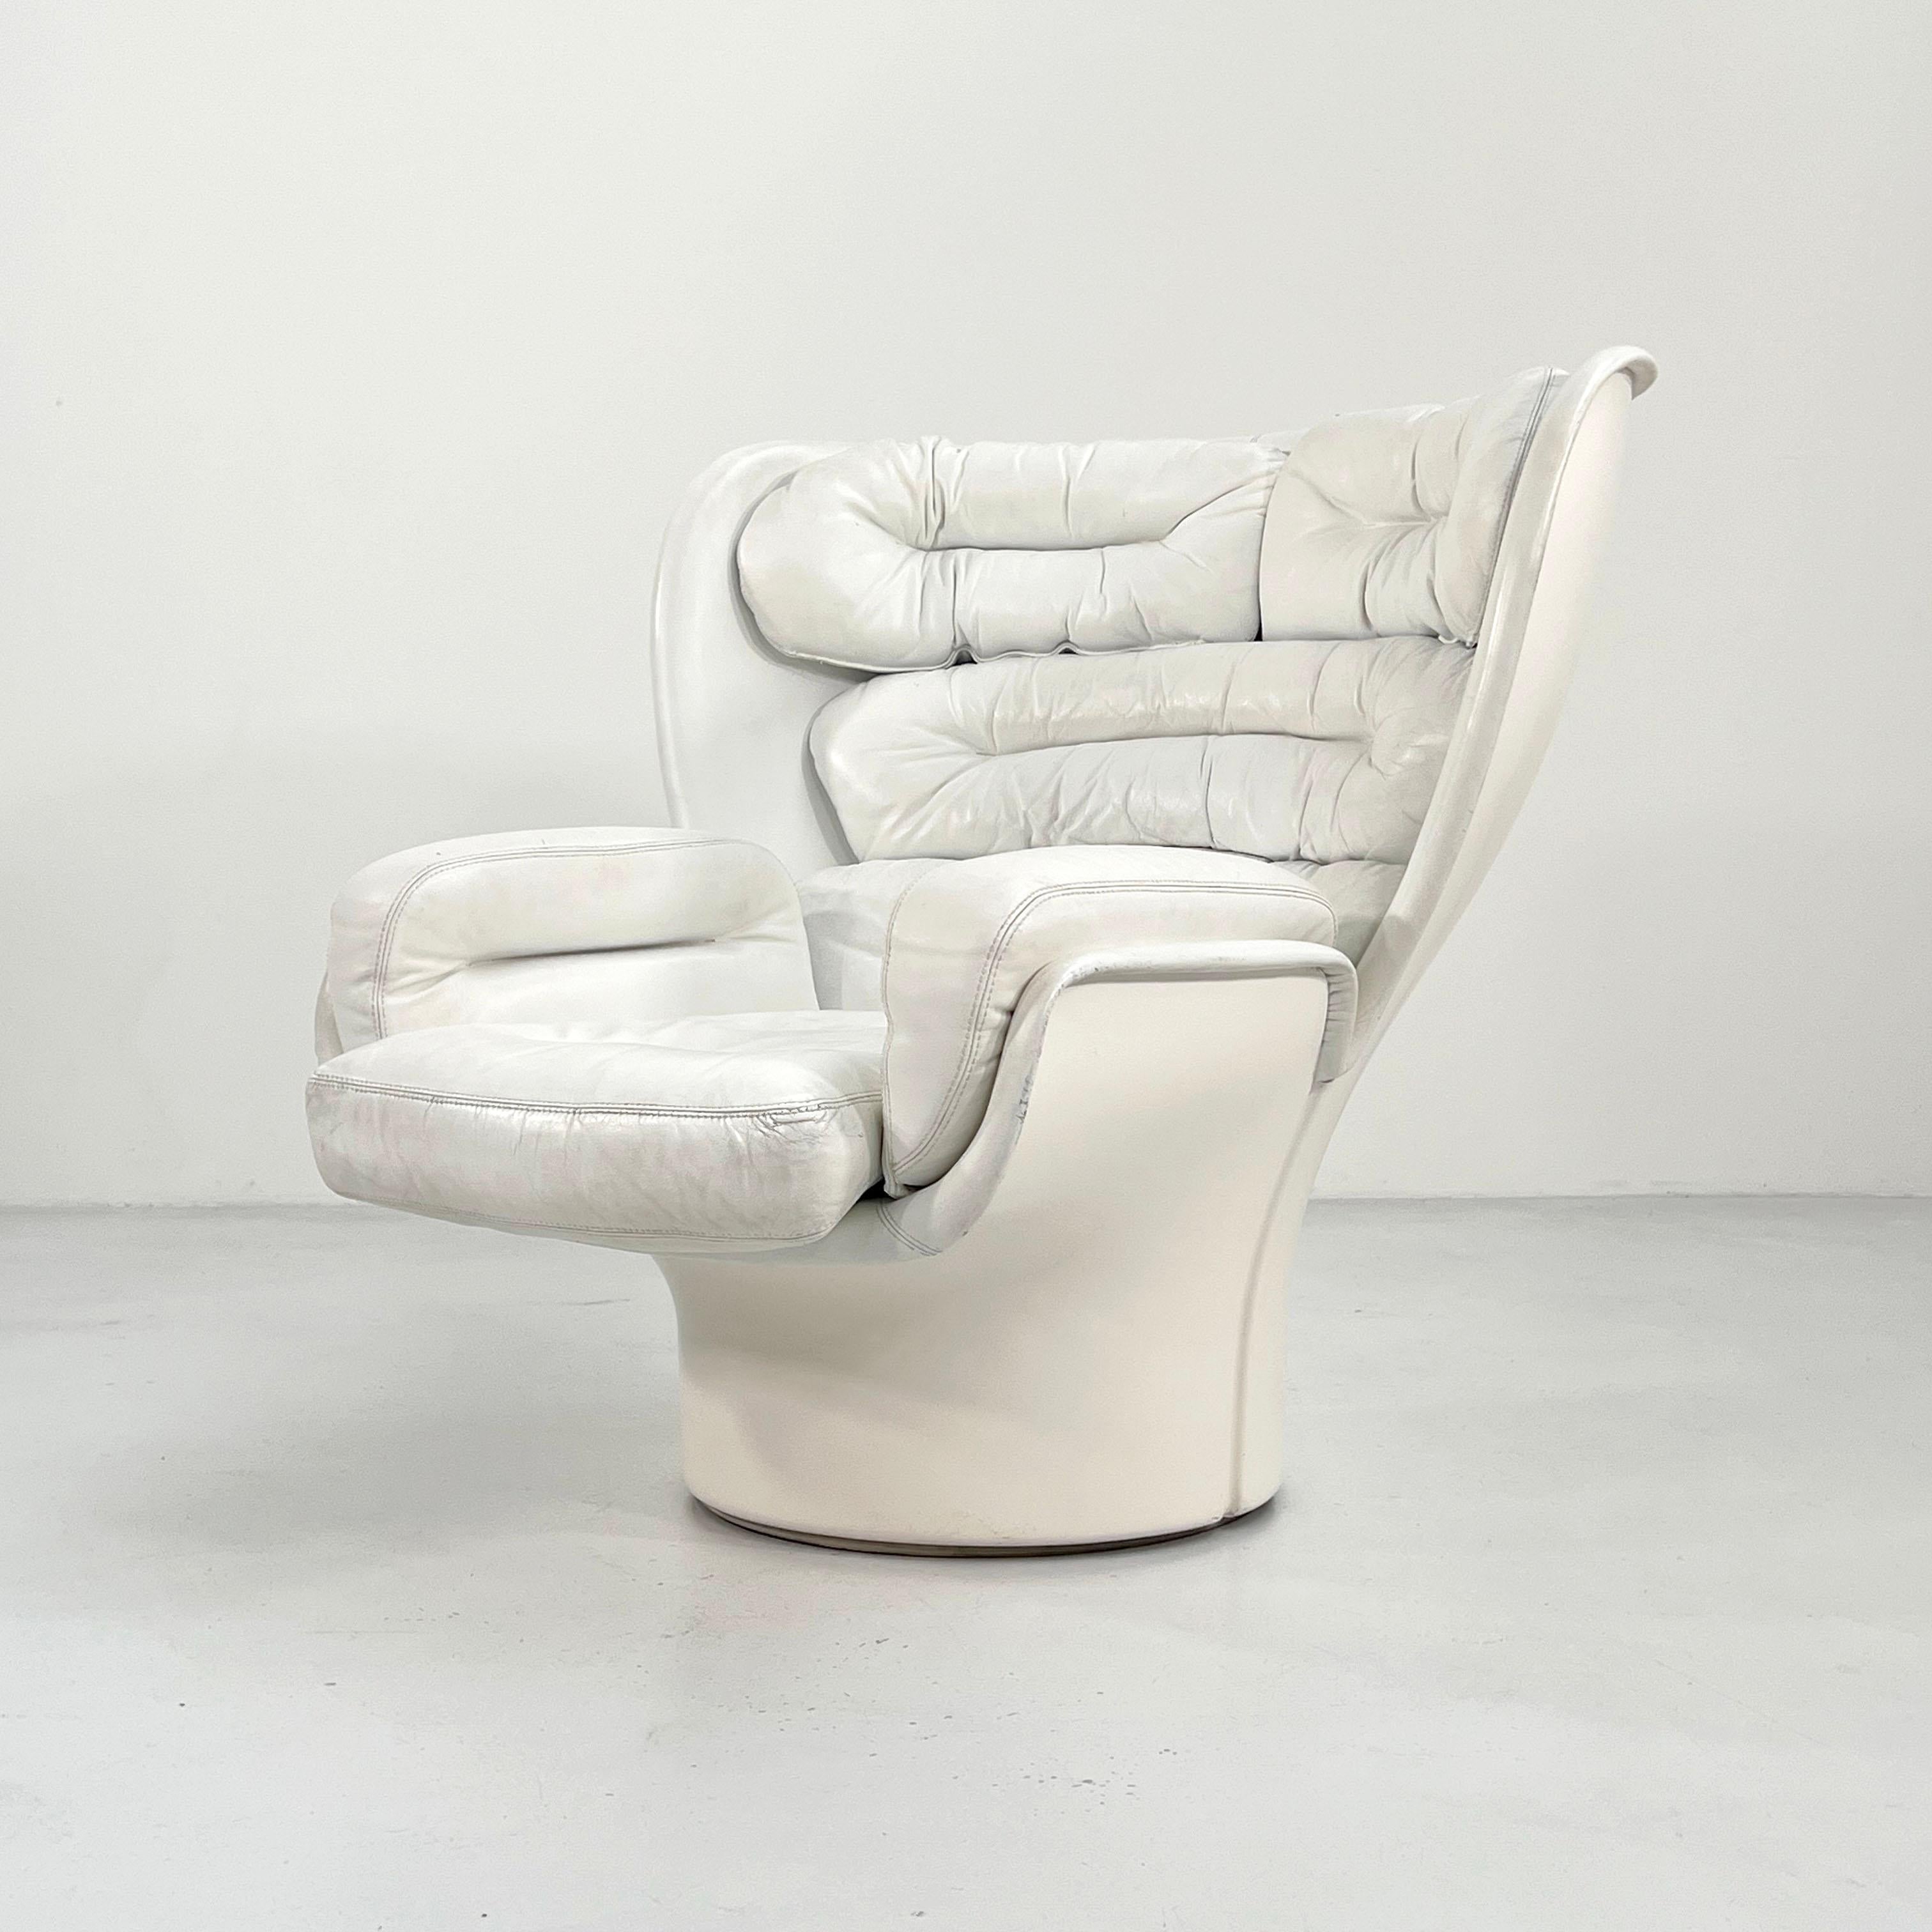 Designer - Joe Colombo
Producer - Comfort
Model - Elda Lounge Chair
Design Period - Sixties
Measurements - Width 100 cm x Depth 92 cm x Height 97 cm x Seat Height 39 cm
Materials - Fiberglass, Leather
Color - White
Light wear consistent with age and